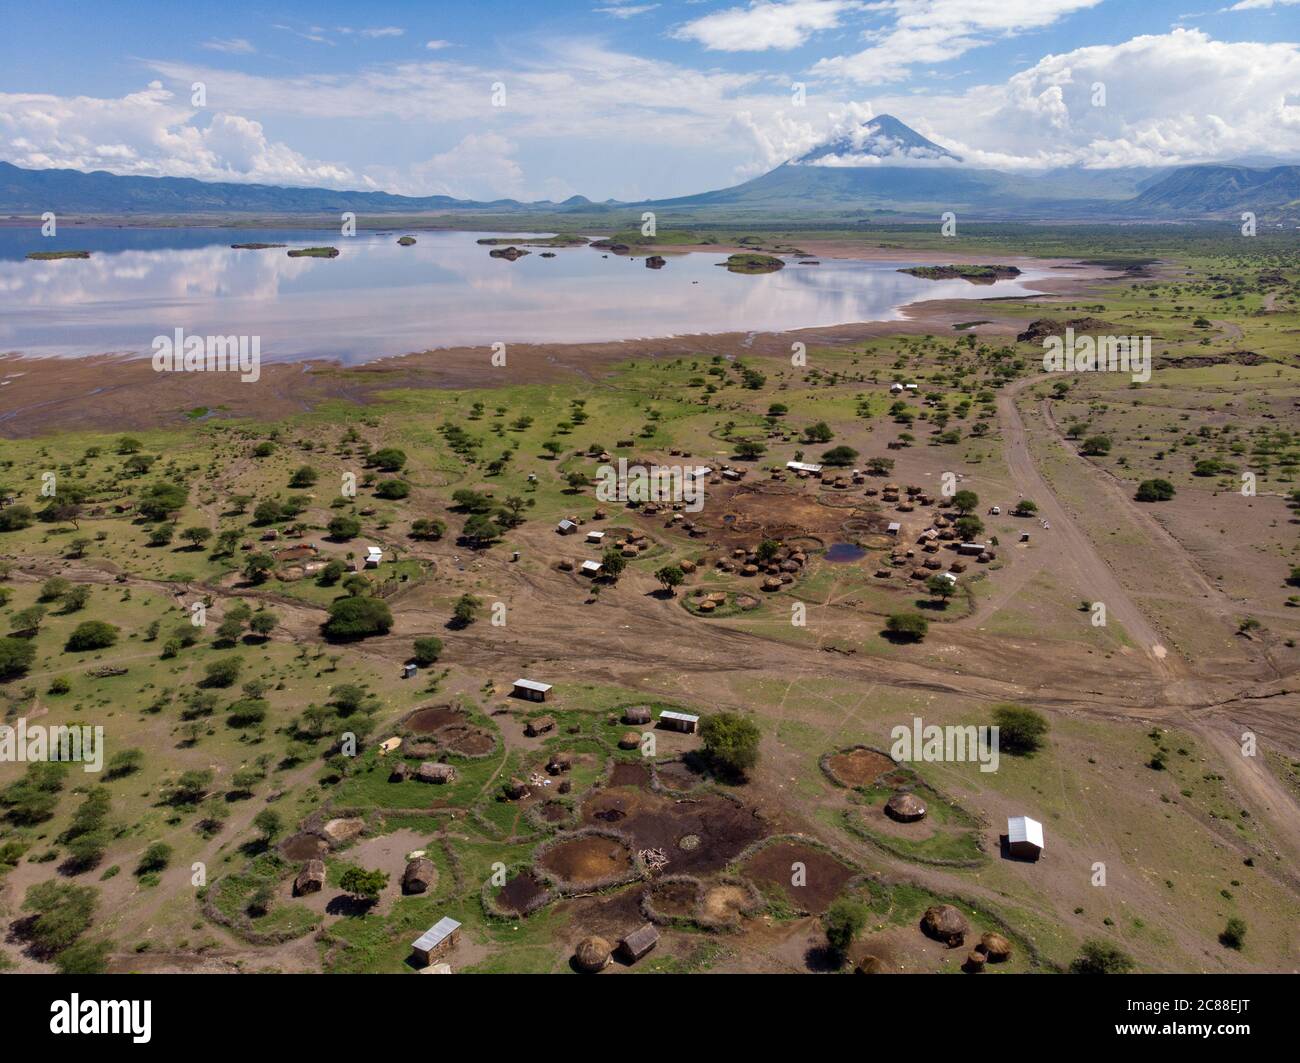 Aerial view of Maasai boma or family rural village on the coast of Salty lake Natron in the Great Rift Valley, Tanzania Stock Photo